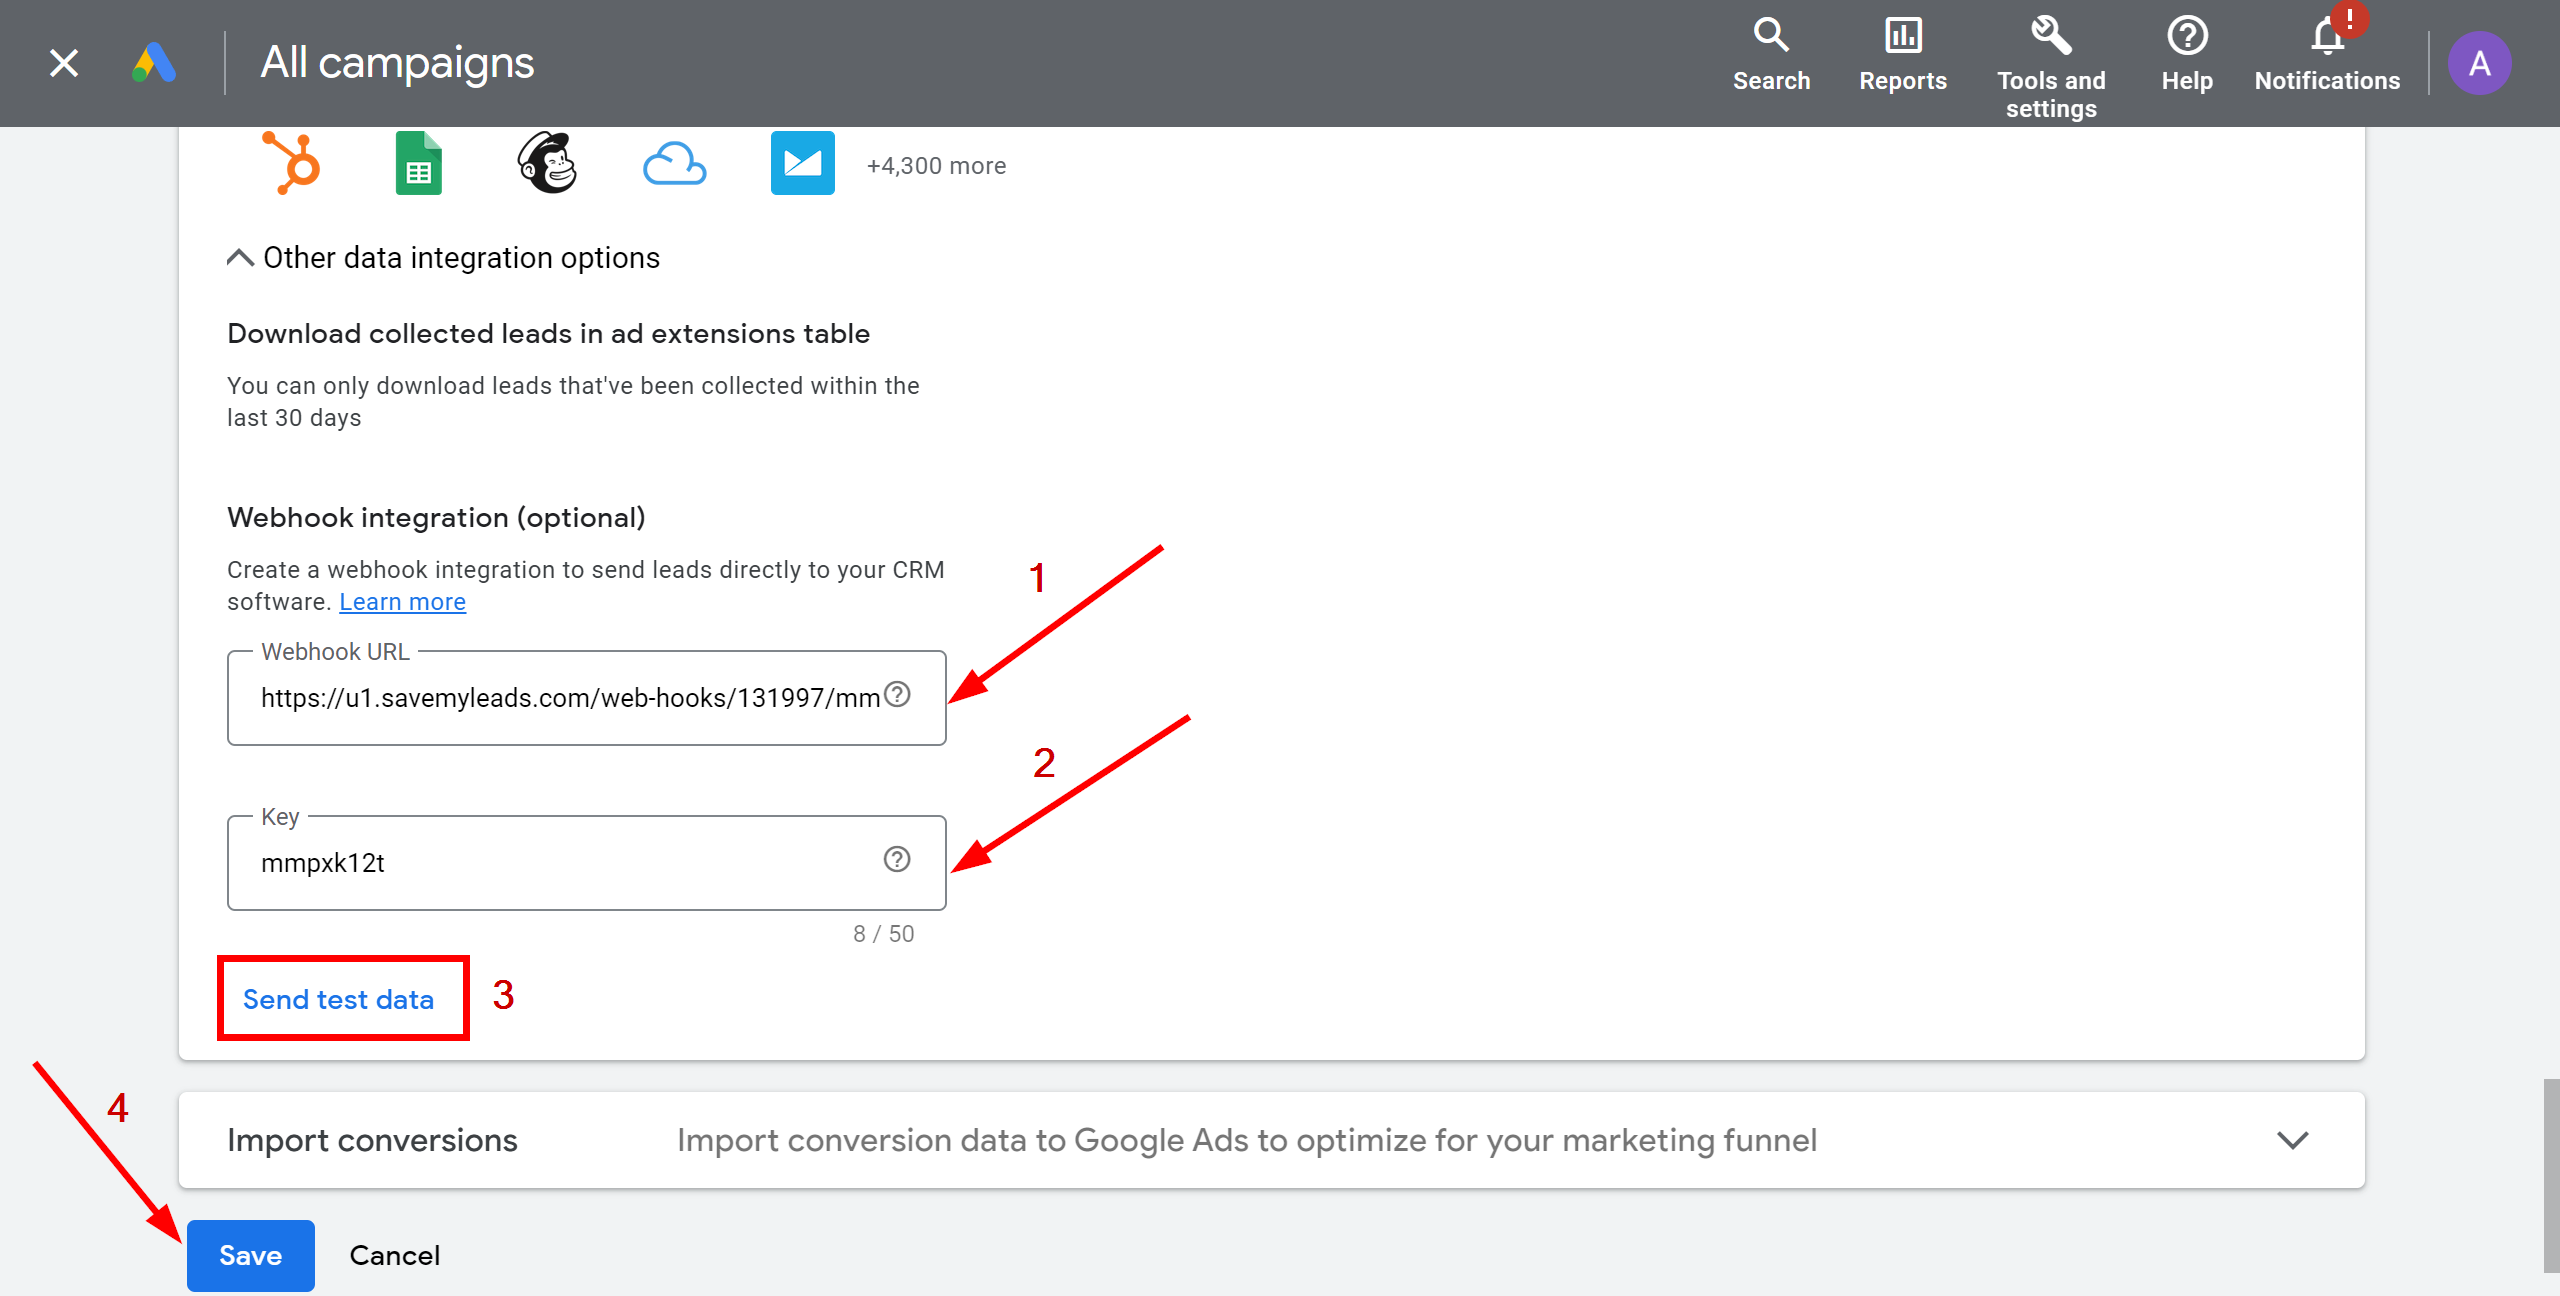 How to Connect Google Lead Form with Sempico Solutions | Data Source account connection